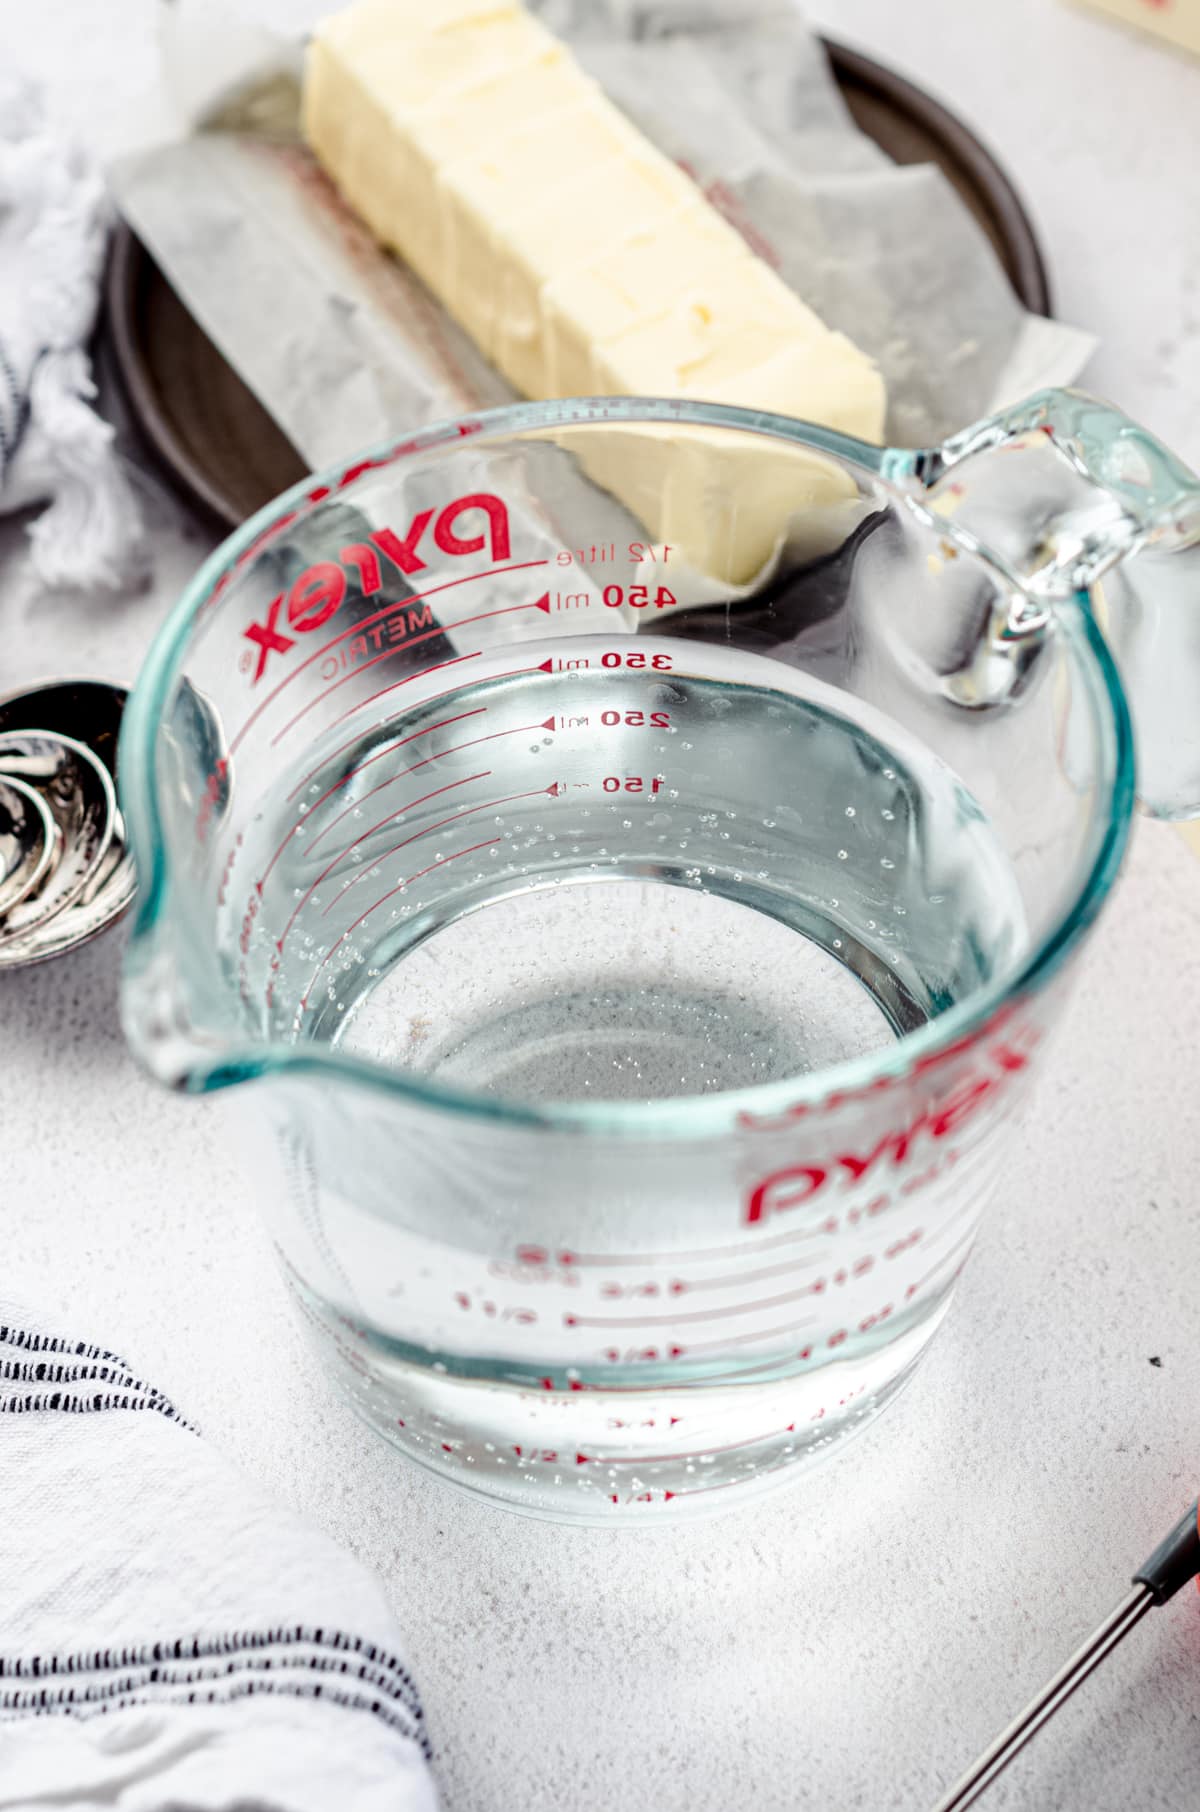 A glass measuring cup full of water with a stick of butter and measuring spoons in the background.